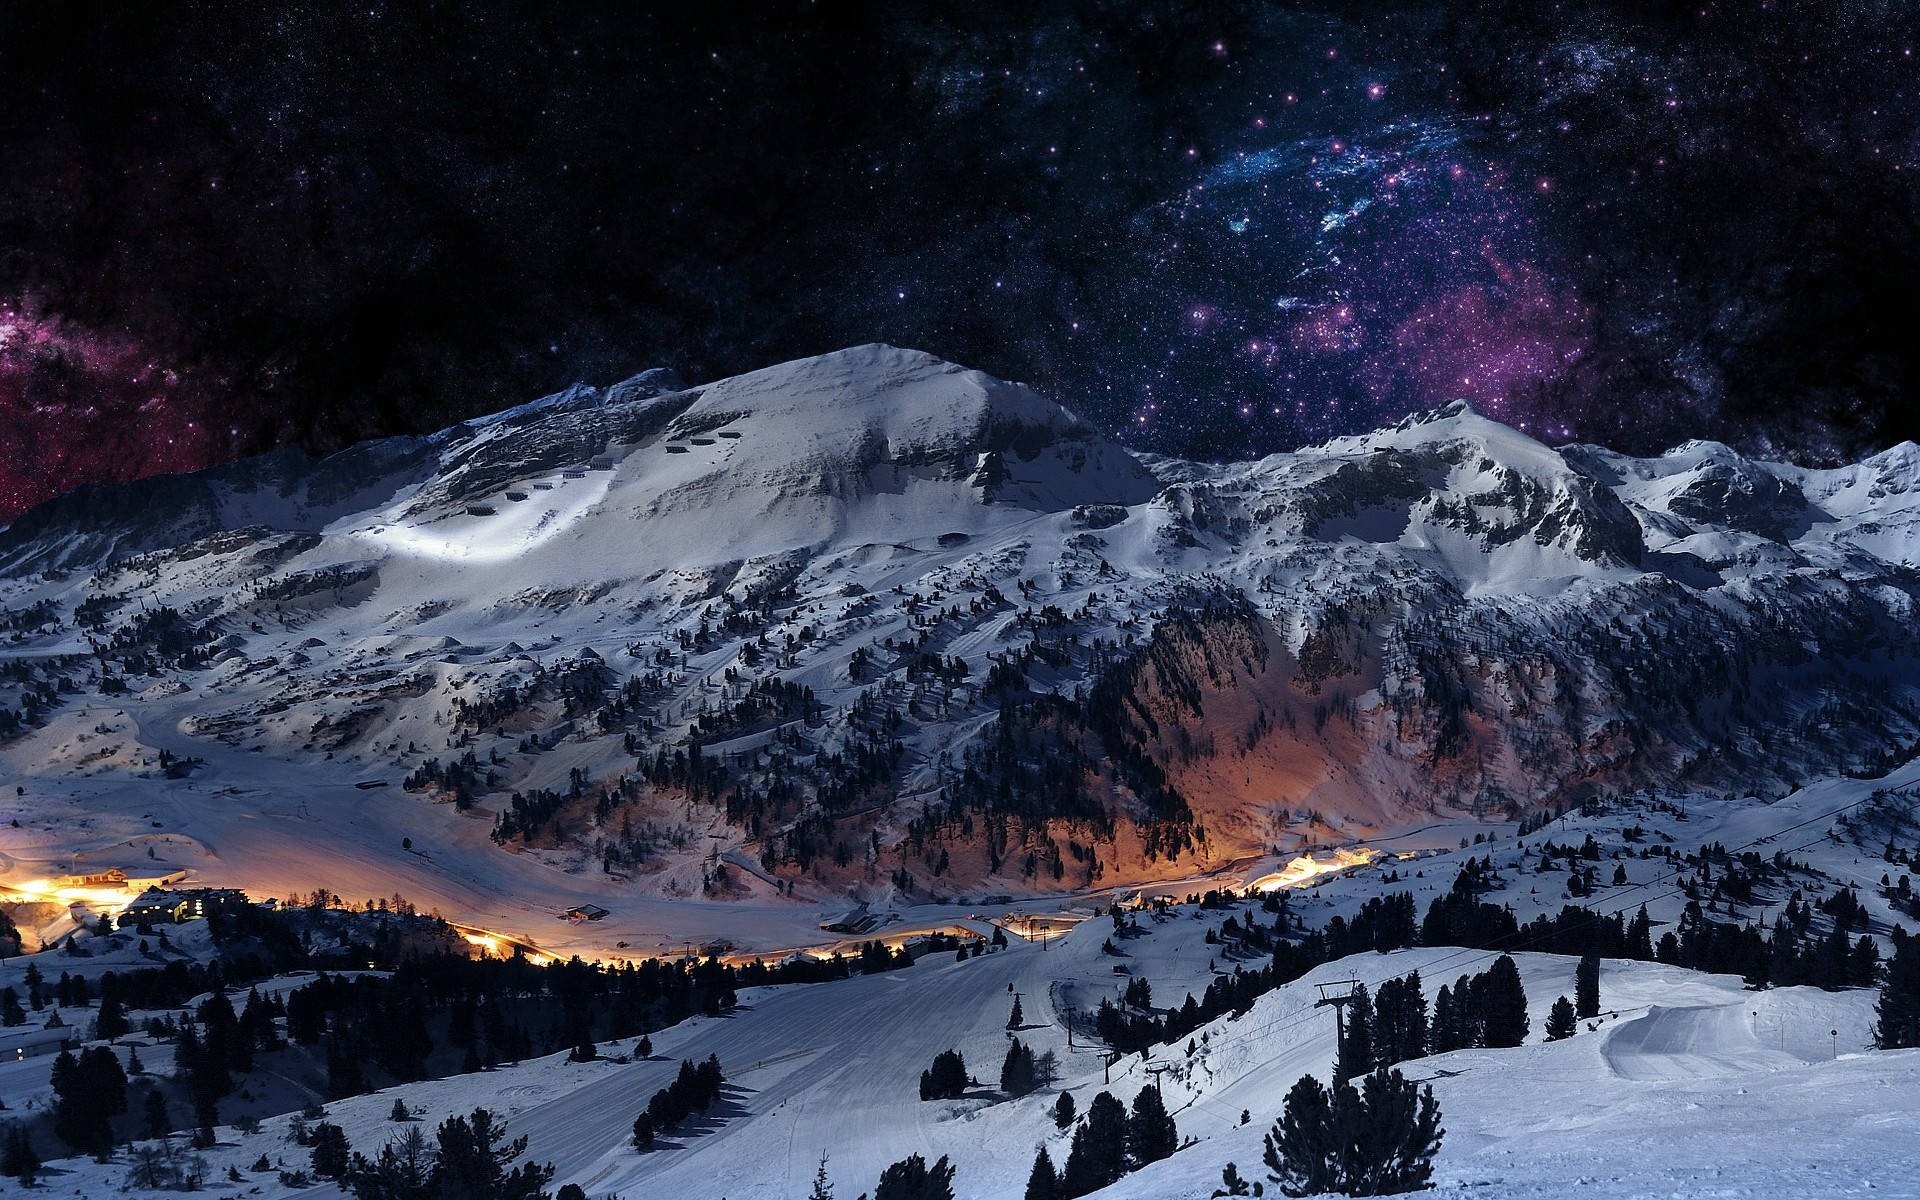 The beauty of a night mountain illuminated with a full moon Wallpaper